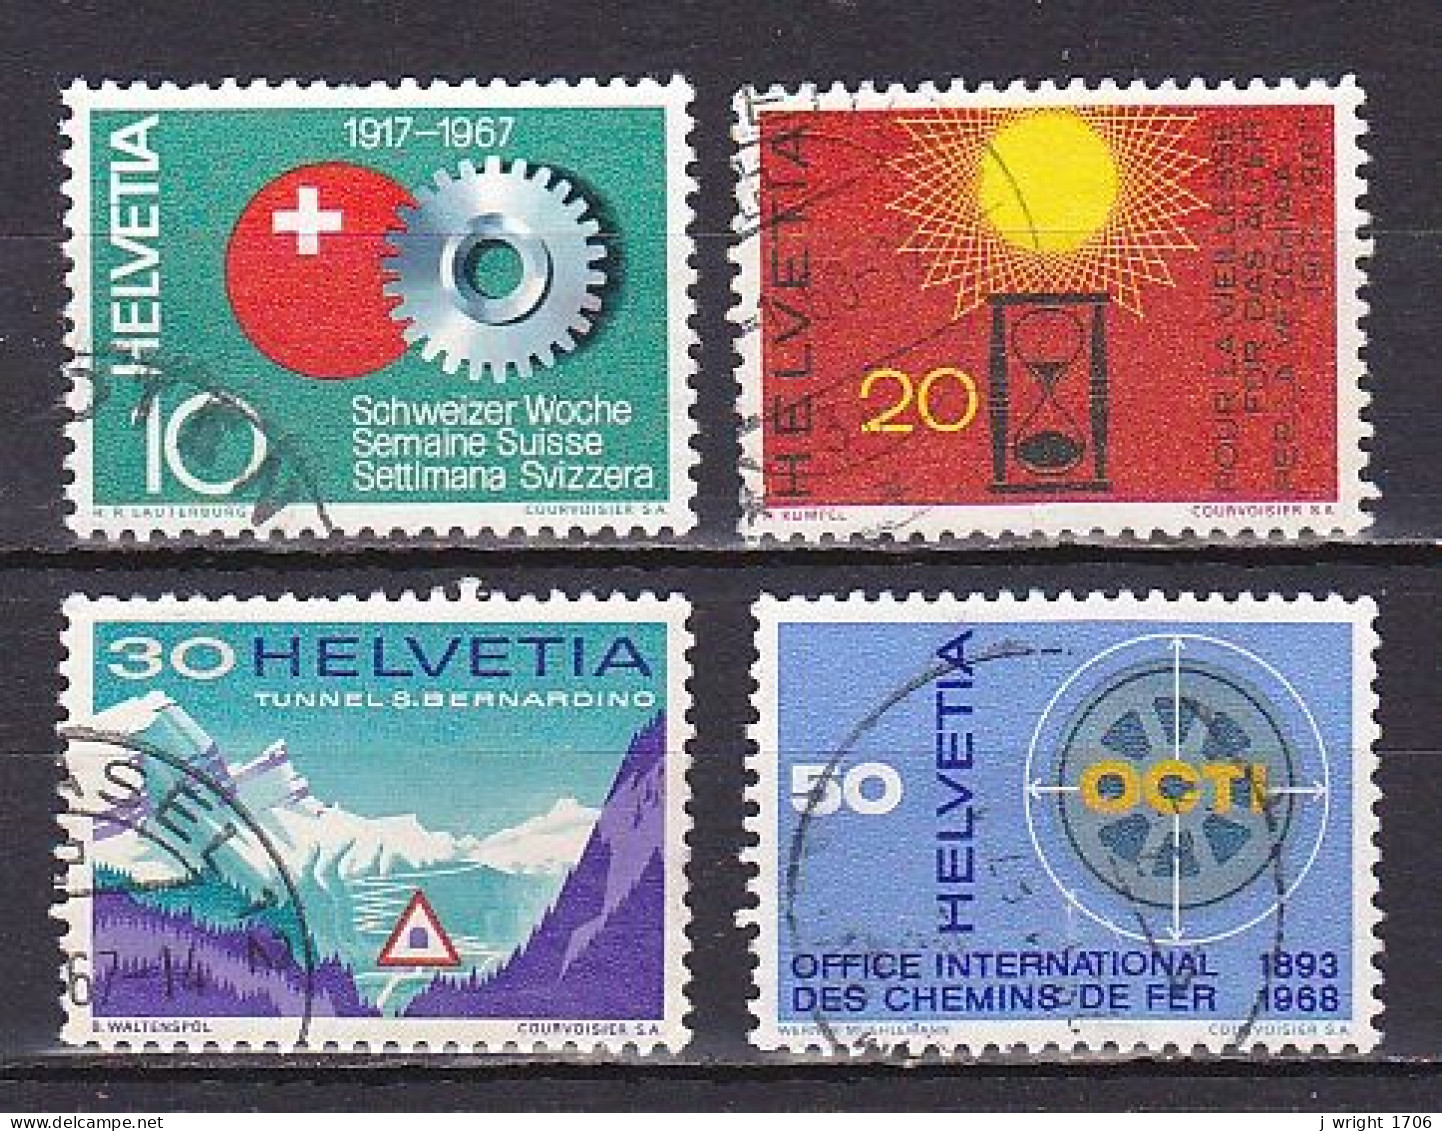 Switzerland, 1967, Publicity Issue, Set, USED - Used Stamps